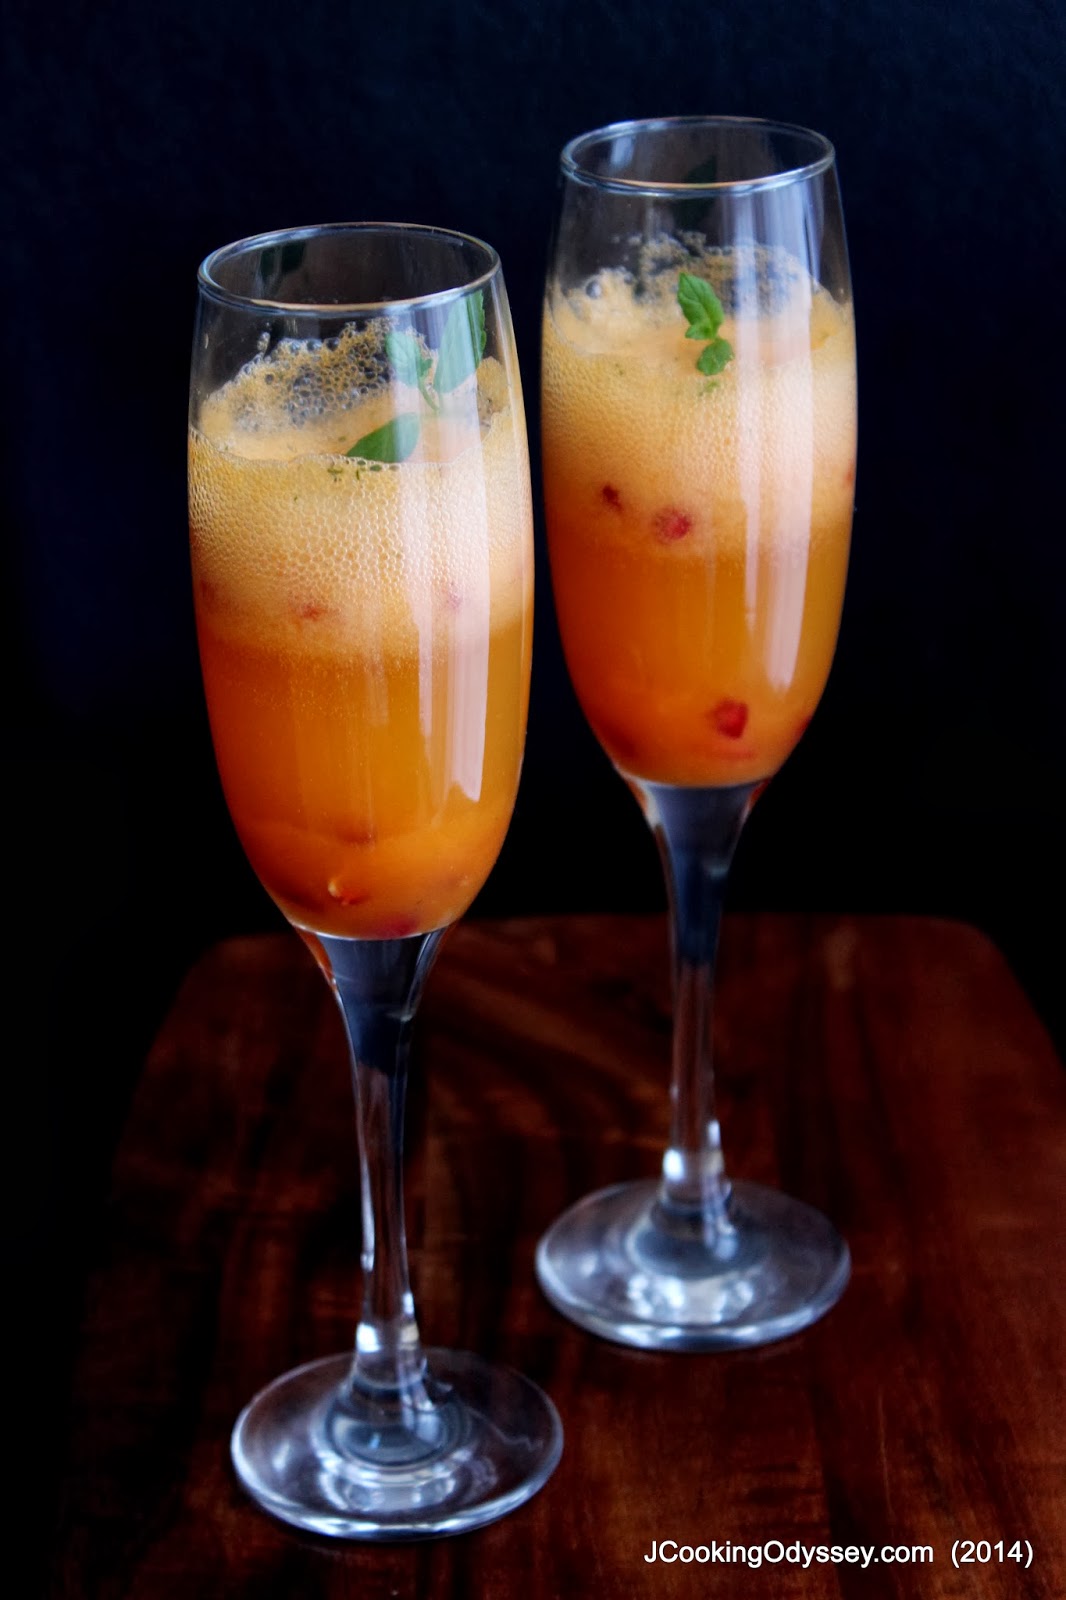 clementine papaya fizz with pomegranate seeds - my 4th blog anniversary with 500 th post !